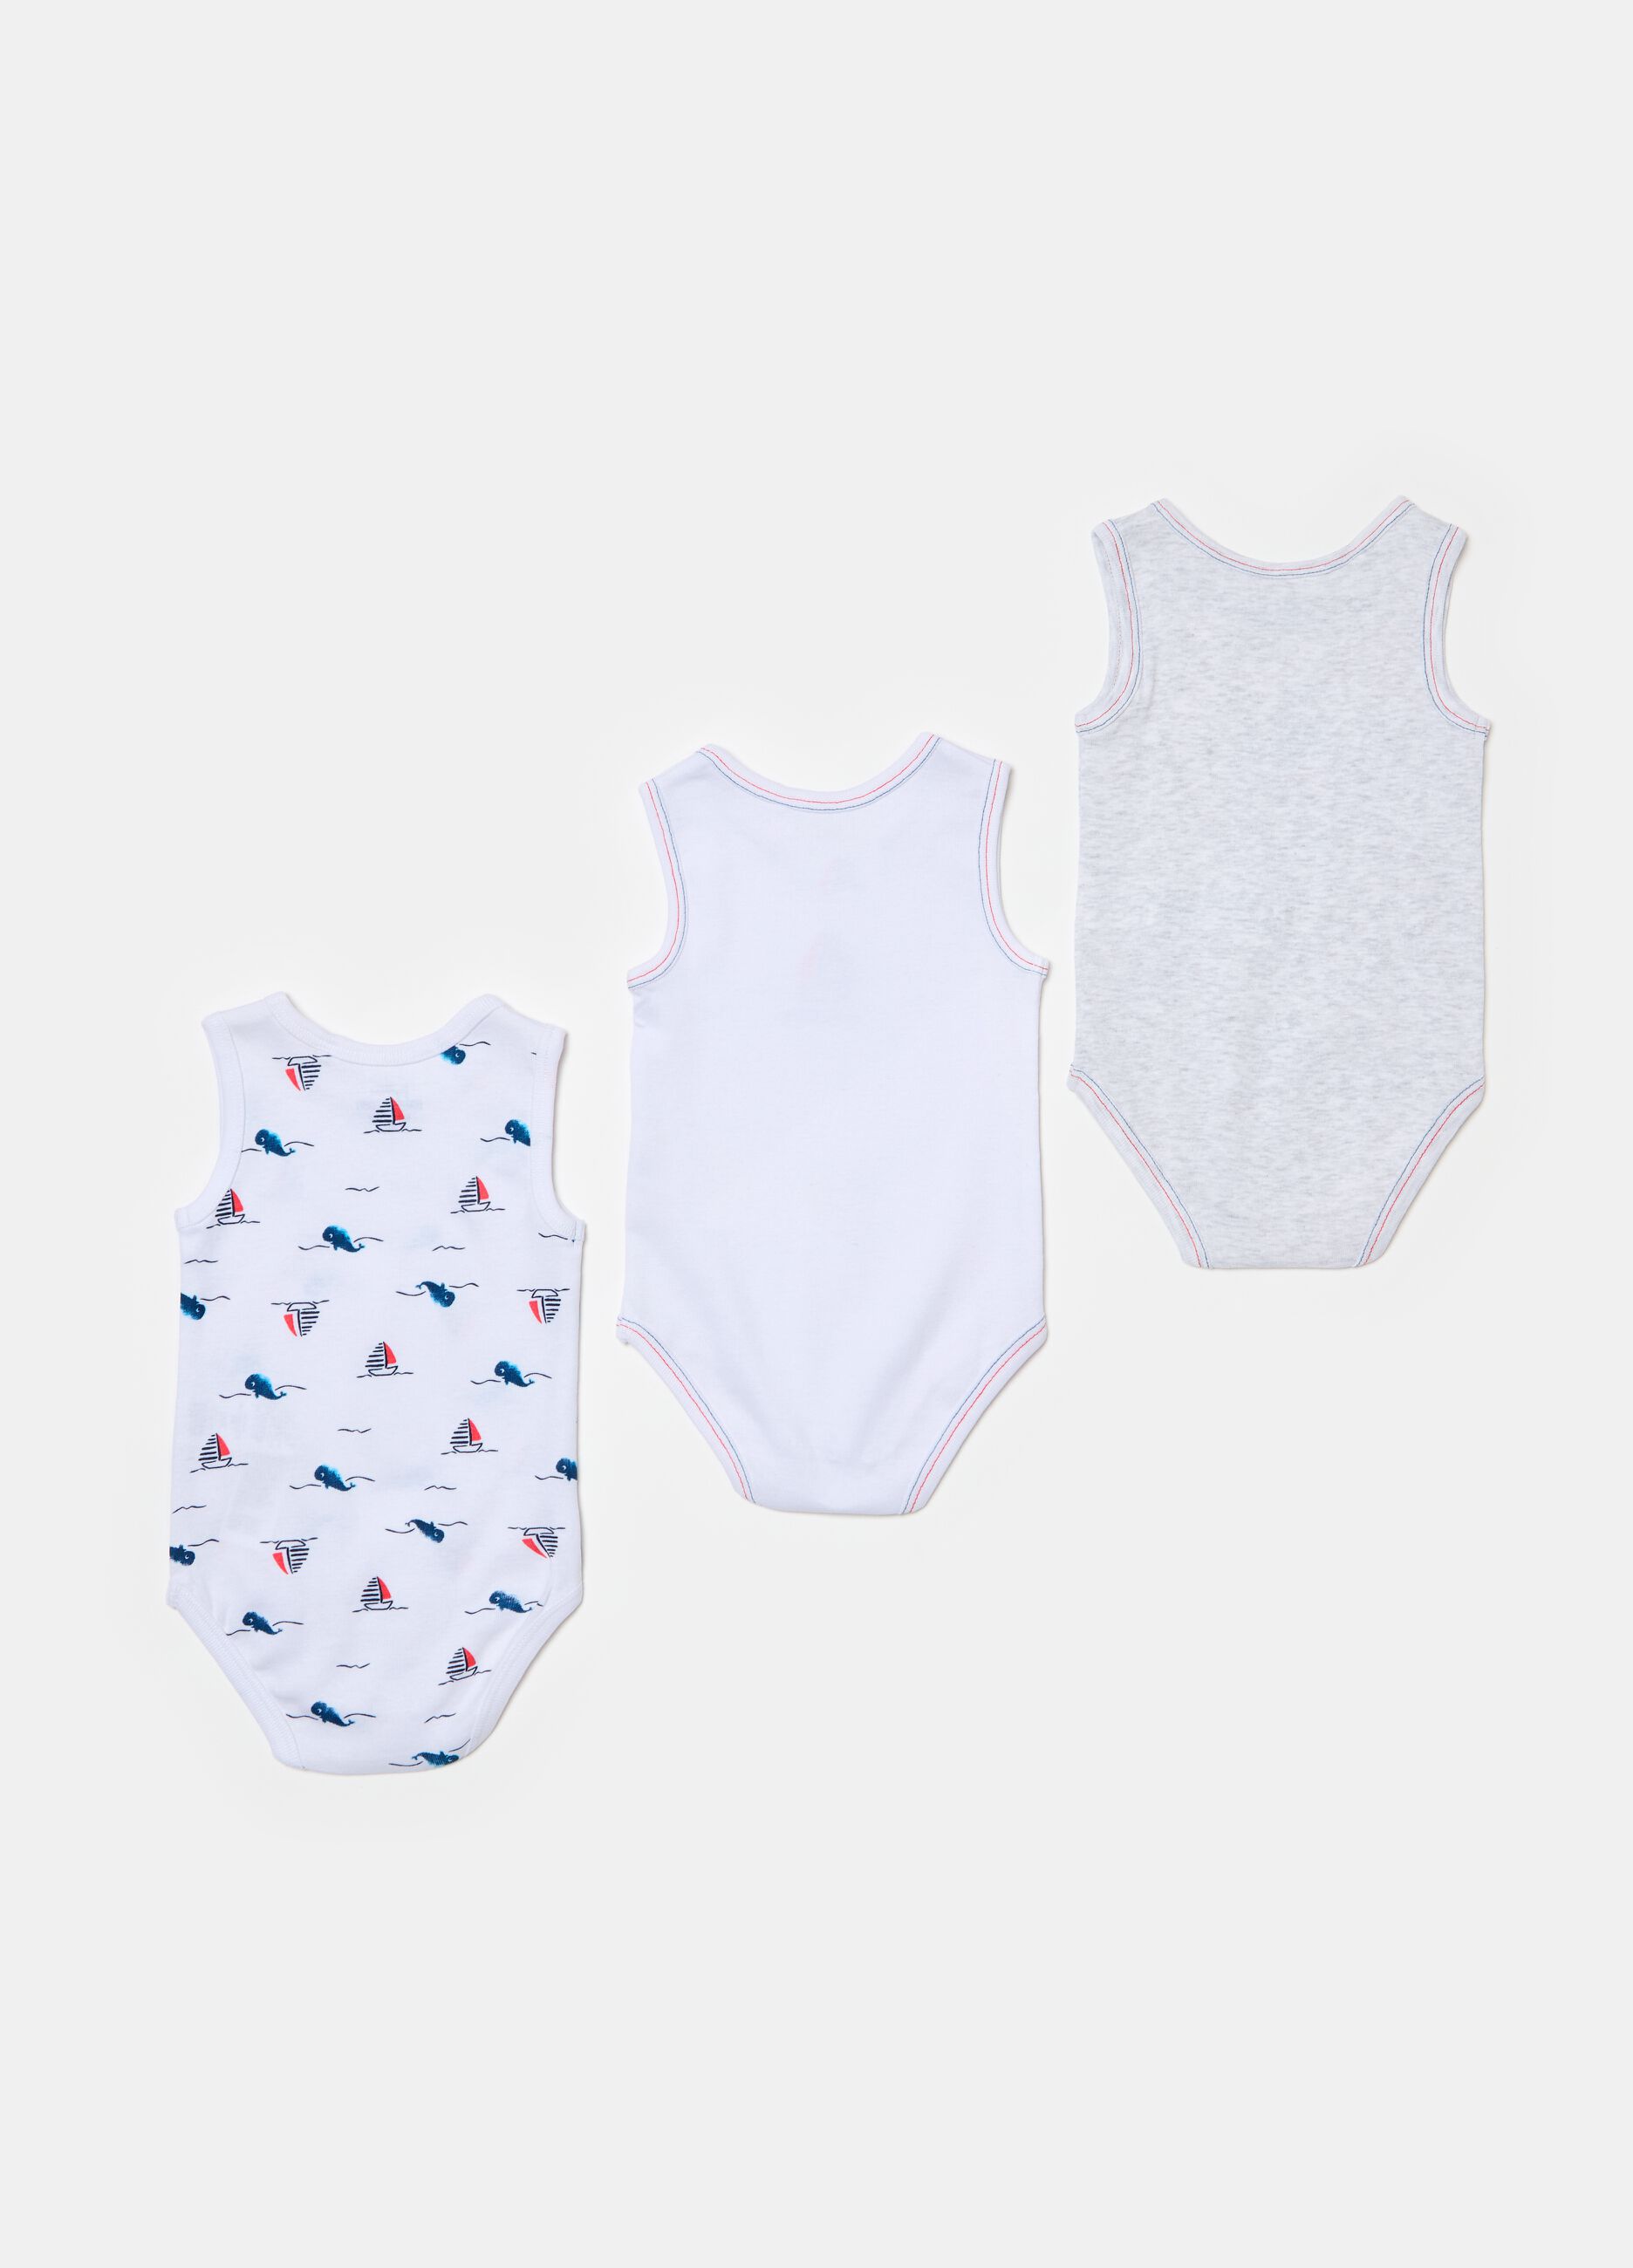 Three-pack bodysuits with whale and sail boat print